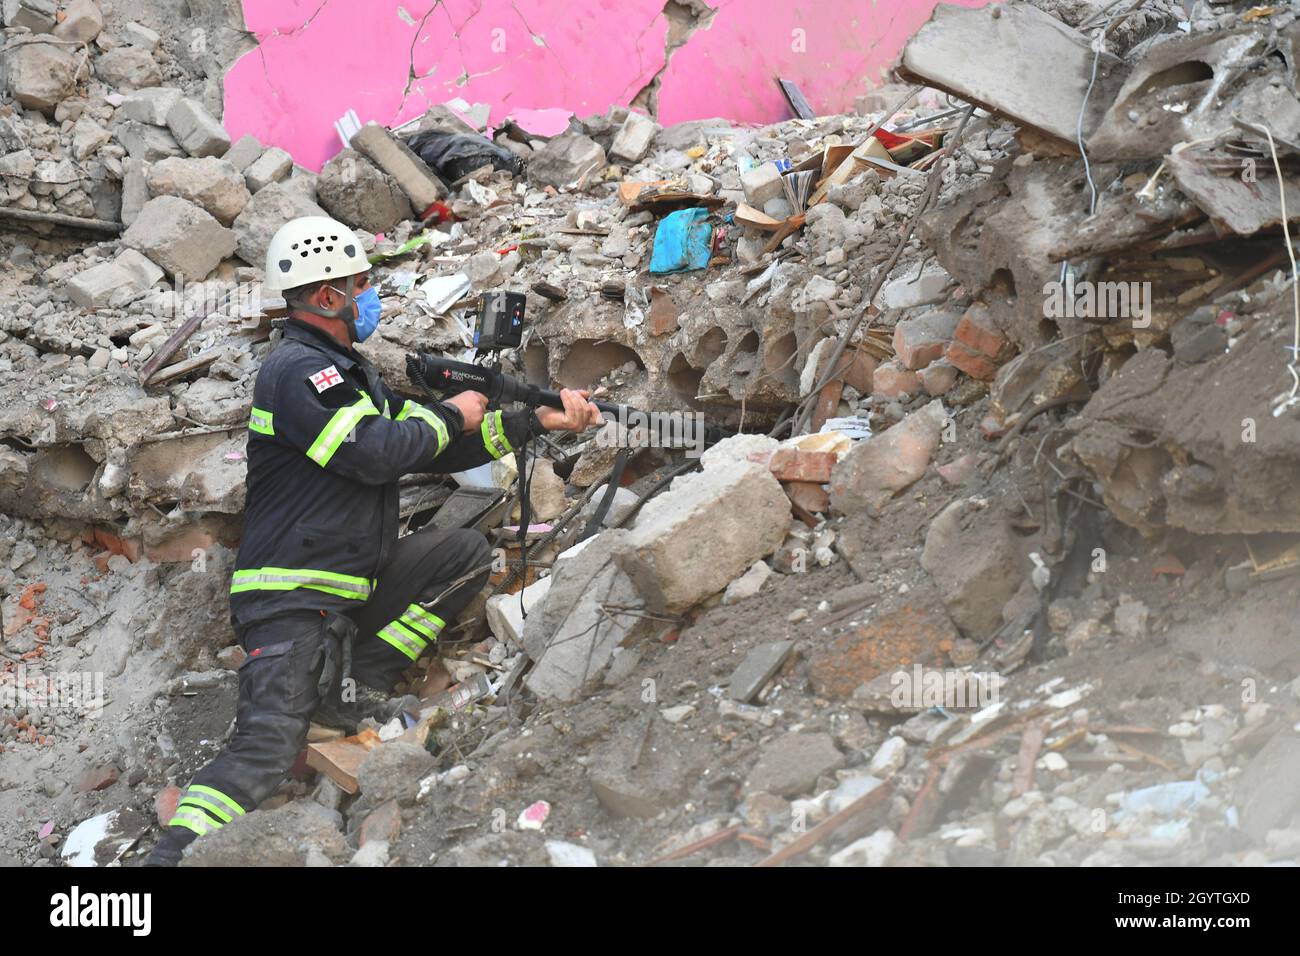 Tbilisi, Georgia. 9th Oct, 2021. A rescuer works on the ruins of a collapsed building in Batumi, Georgia, Oct. 9, 2021. Nine people were killed after a multi-block residential building collapsed in Georgia's Black Sea town of Batumi, the country's interior ministry said on Saturday. The collapse, which happened on Friday, was reportedly caused by violation of construction procedures that had damaged its retaining wall. Credit: Kulumbegashvili Tamuna/Xinhua/Alamy Live News Stock Photo